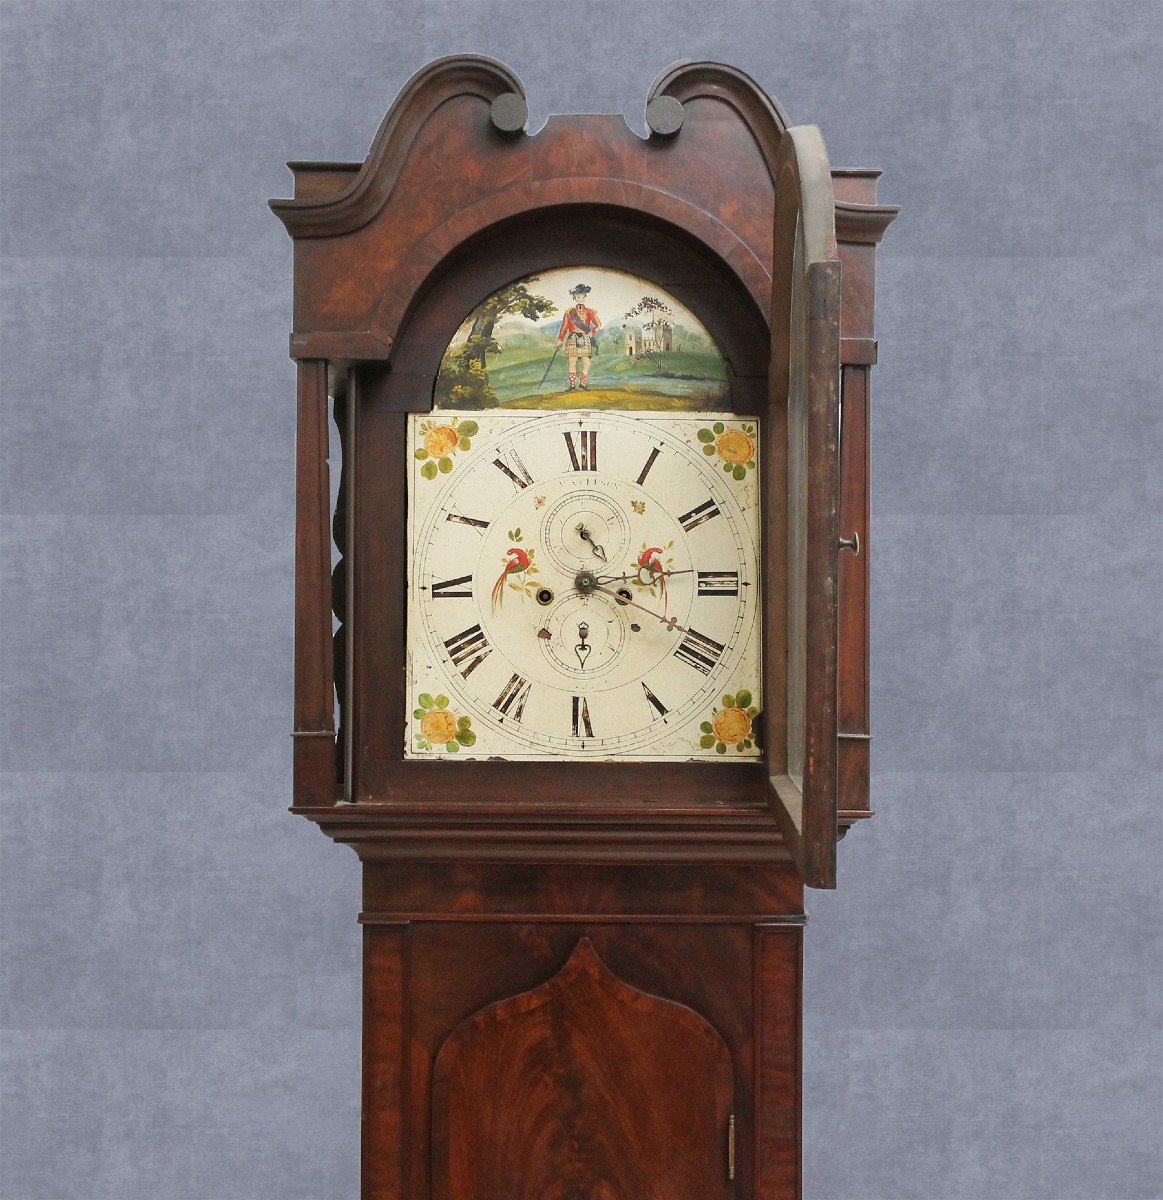 Large And Beautiful George III Style Mahogany Clock, Late 1700s Early 1800s.-photo-3